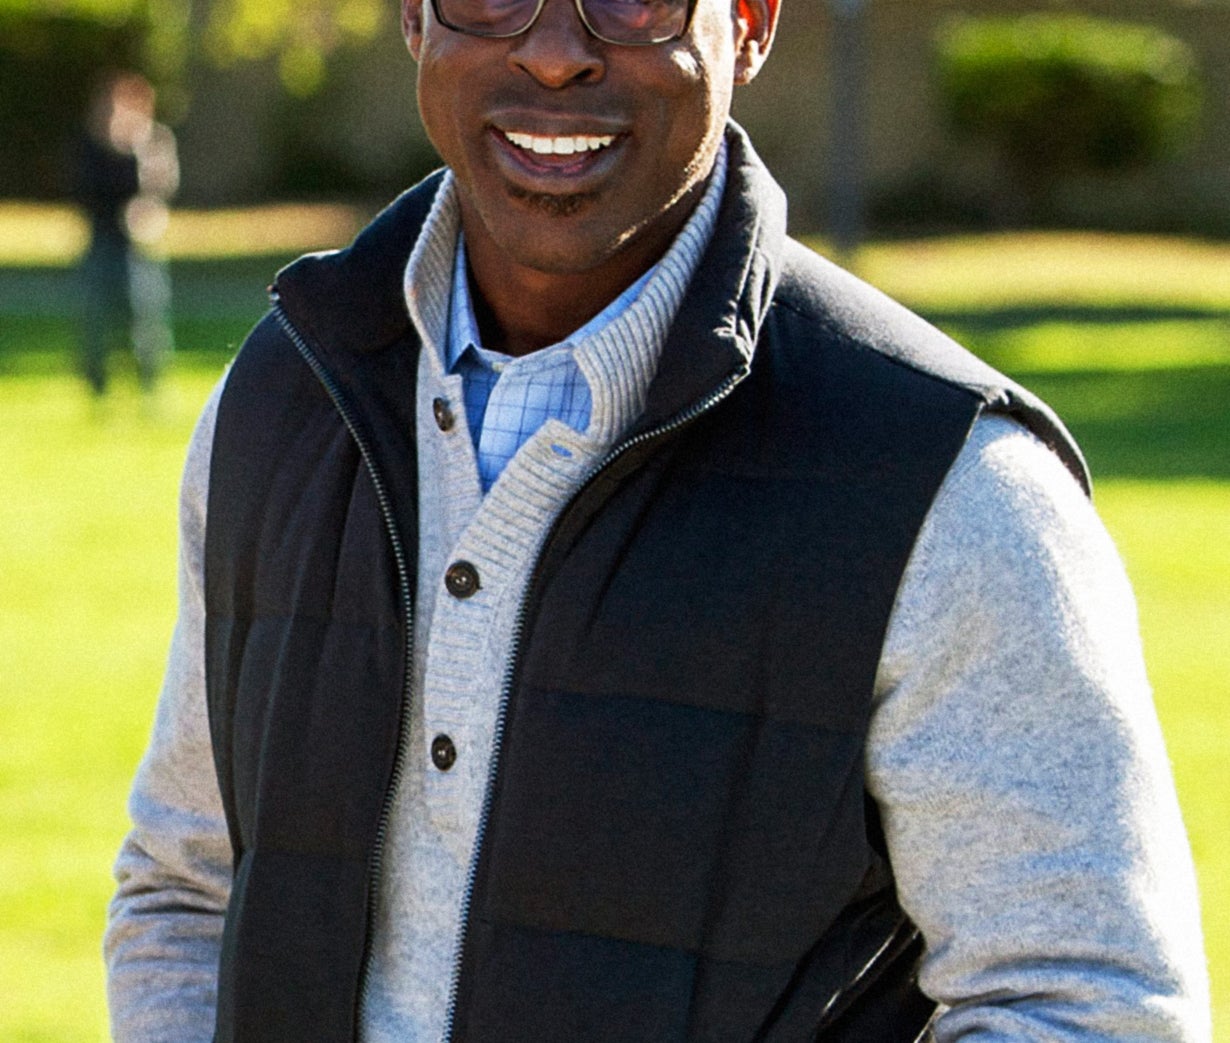 A man in glasses smiles wearing a layered sweater and vest, standing outside